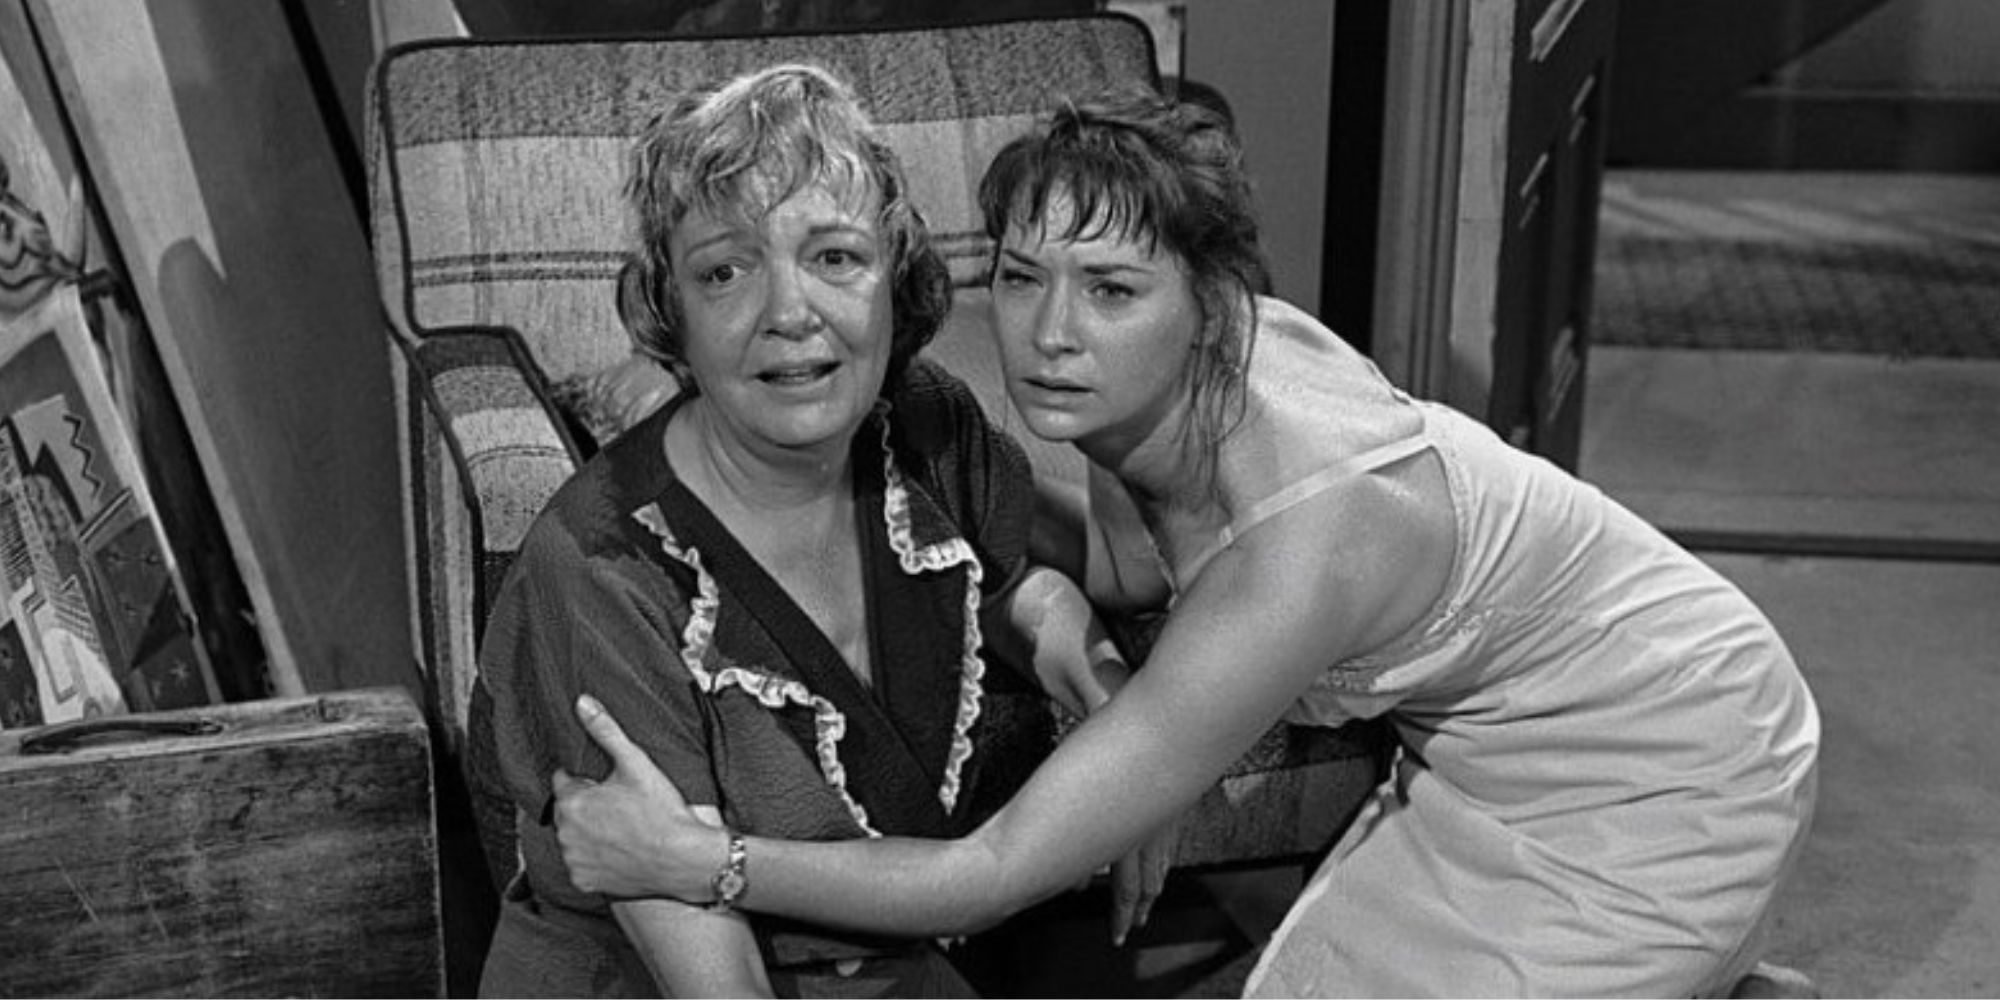 Lois Nettleton and Betty Garde sitting on the floor in The Twilight Zone